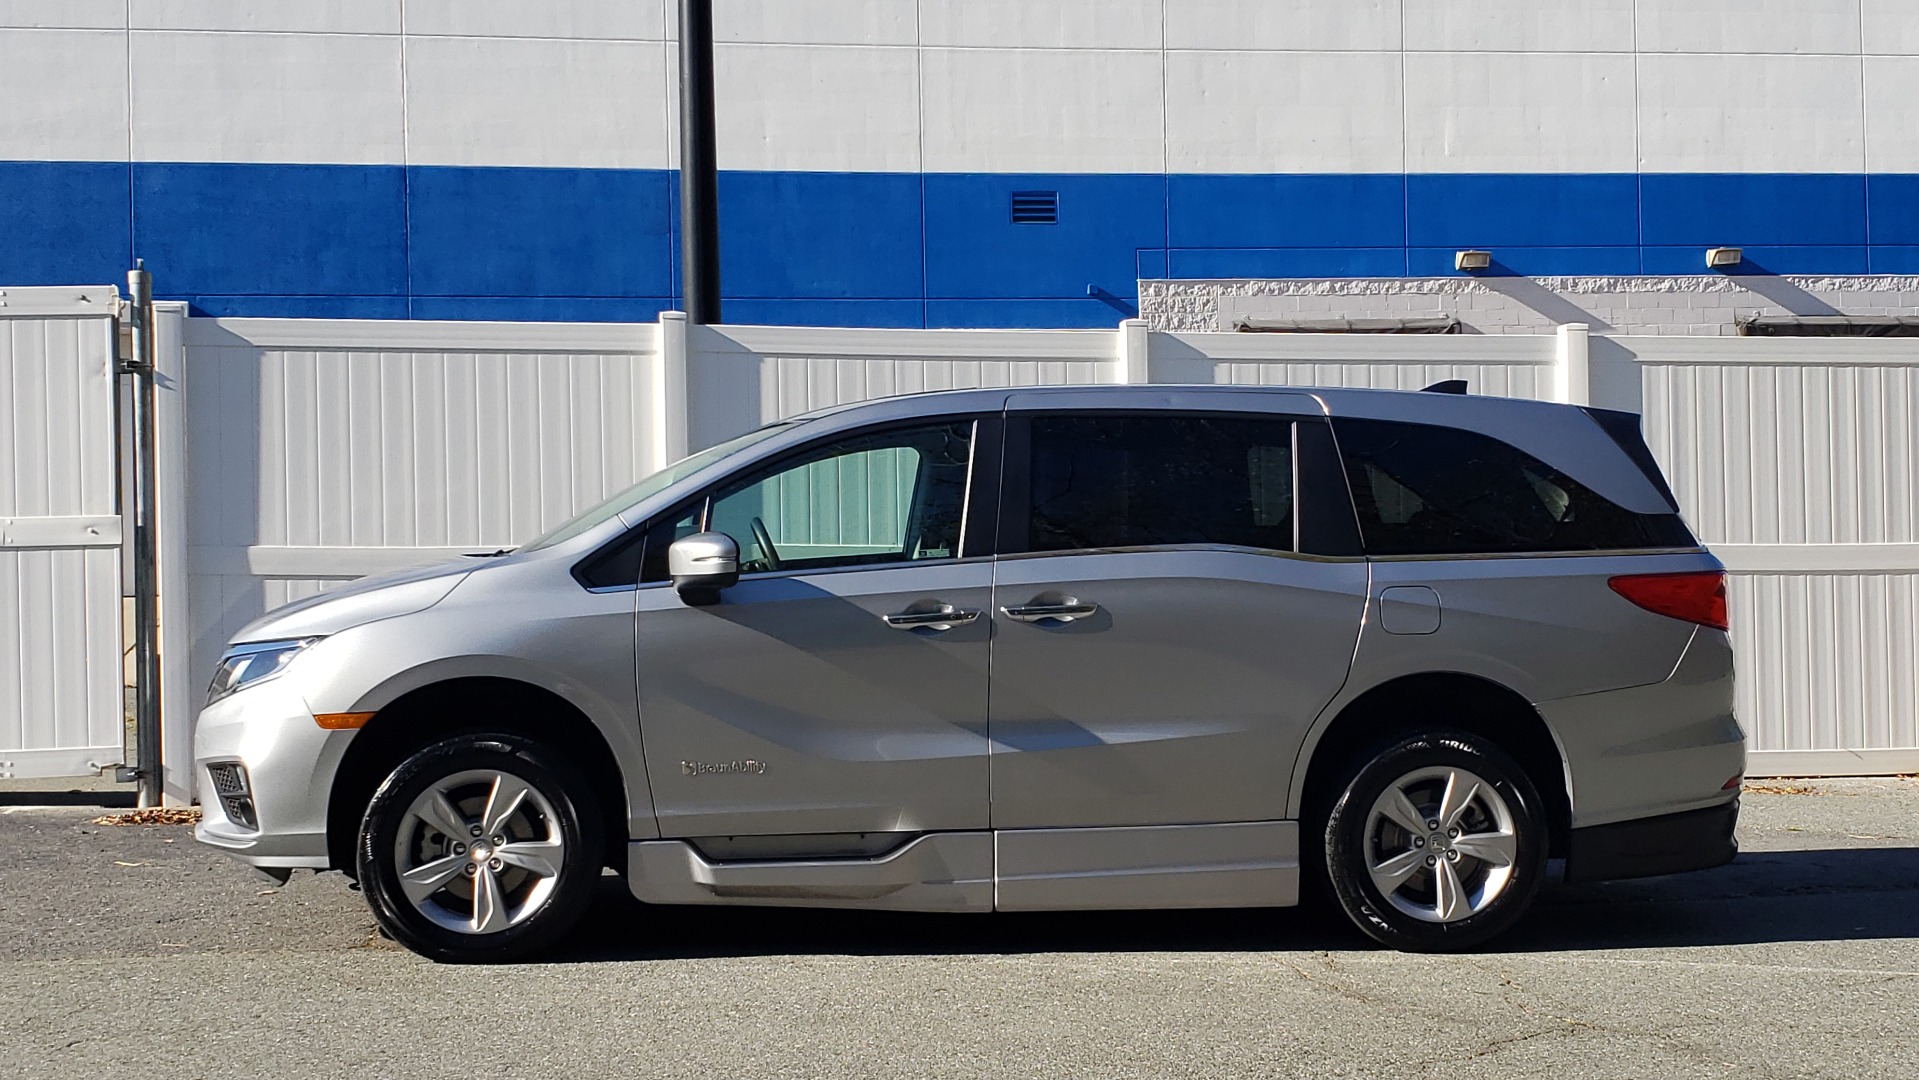 Used 2019 Honda ODYSSEY EX-L BRAUNABILITY / NAV / RES / LKA / BLUE-RAY / SUNROOF / REARVIEW for sale Sold at Formula Imports in Charlotte NC 28227 2